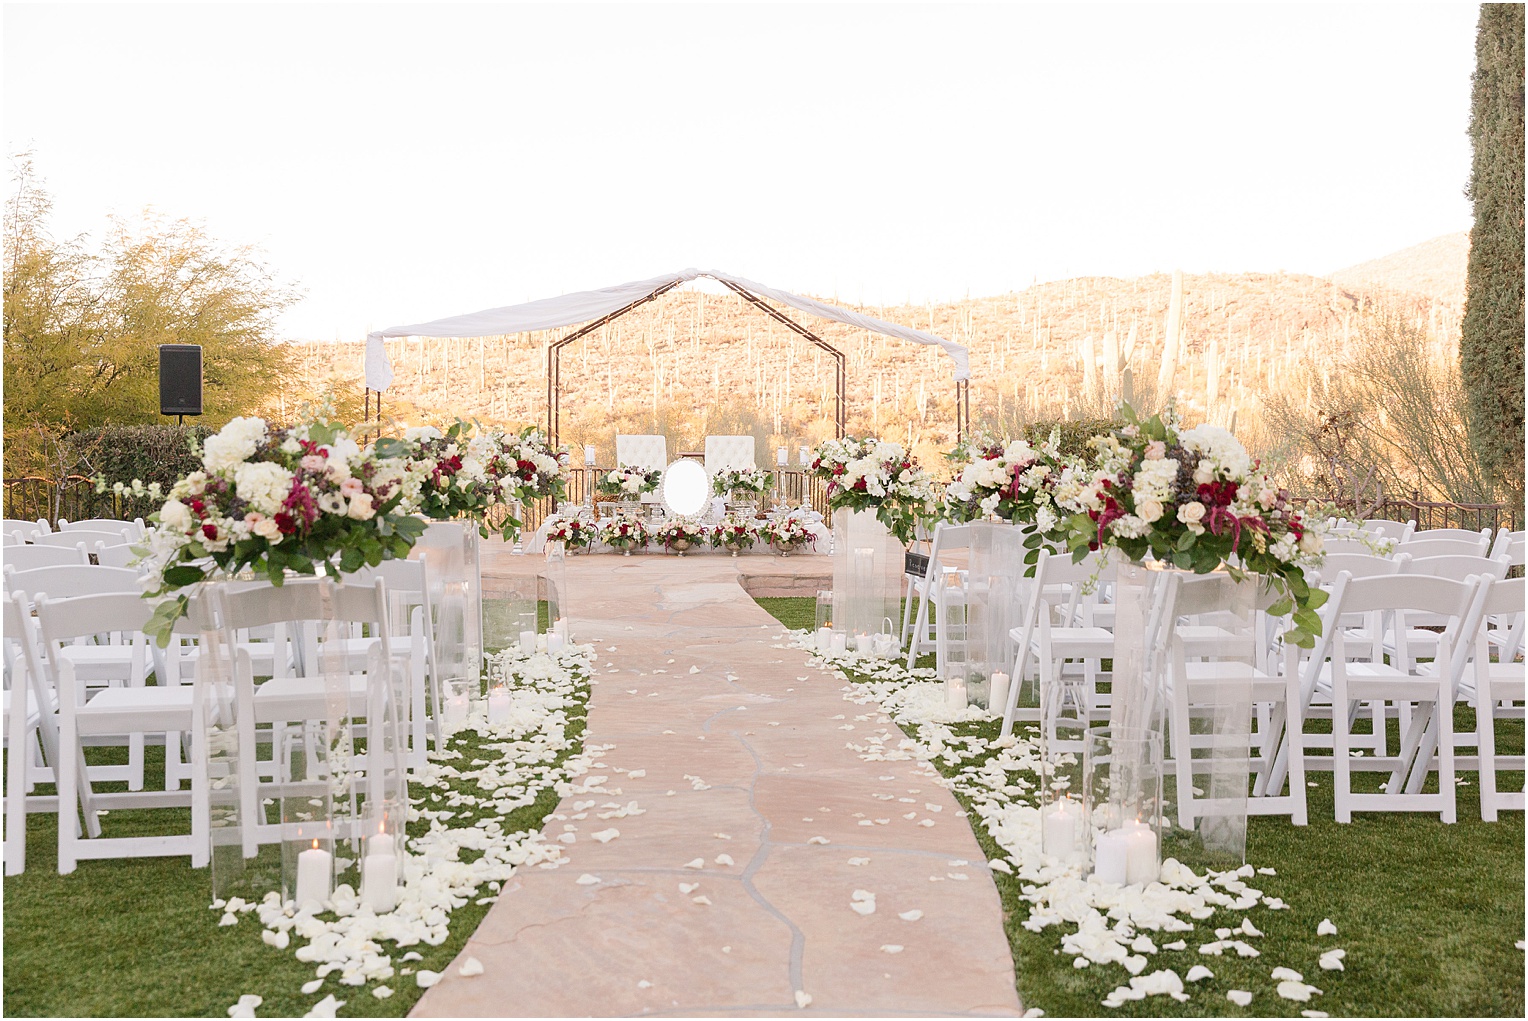 Saguaro Buttes Wedding Tucson, Arizona Farnaz & Brian romantic outdoor wedding with floral lined aisle